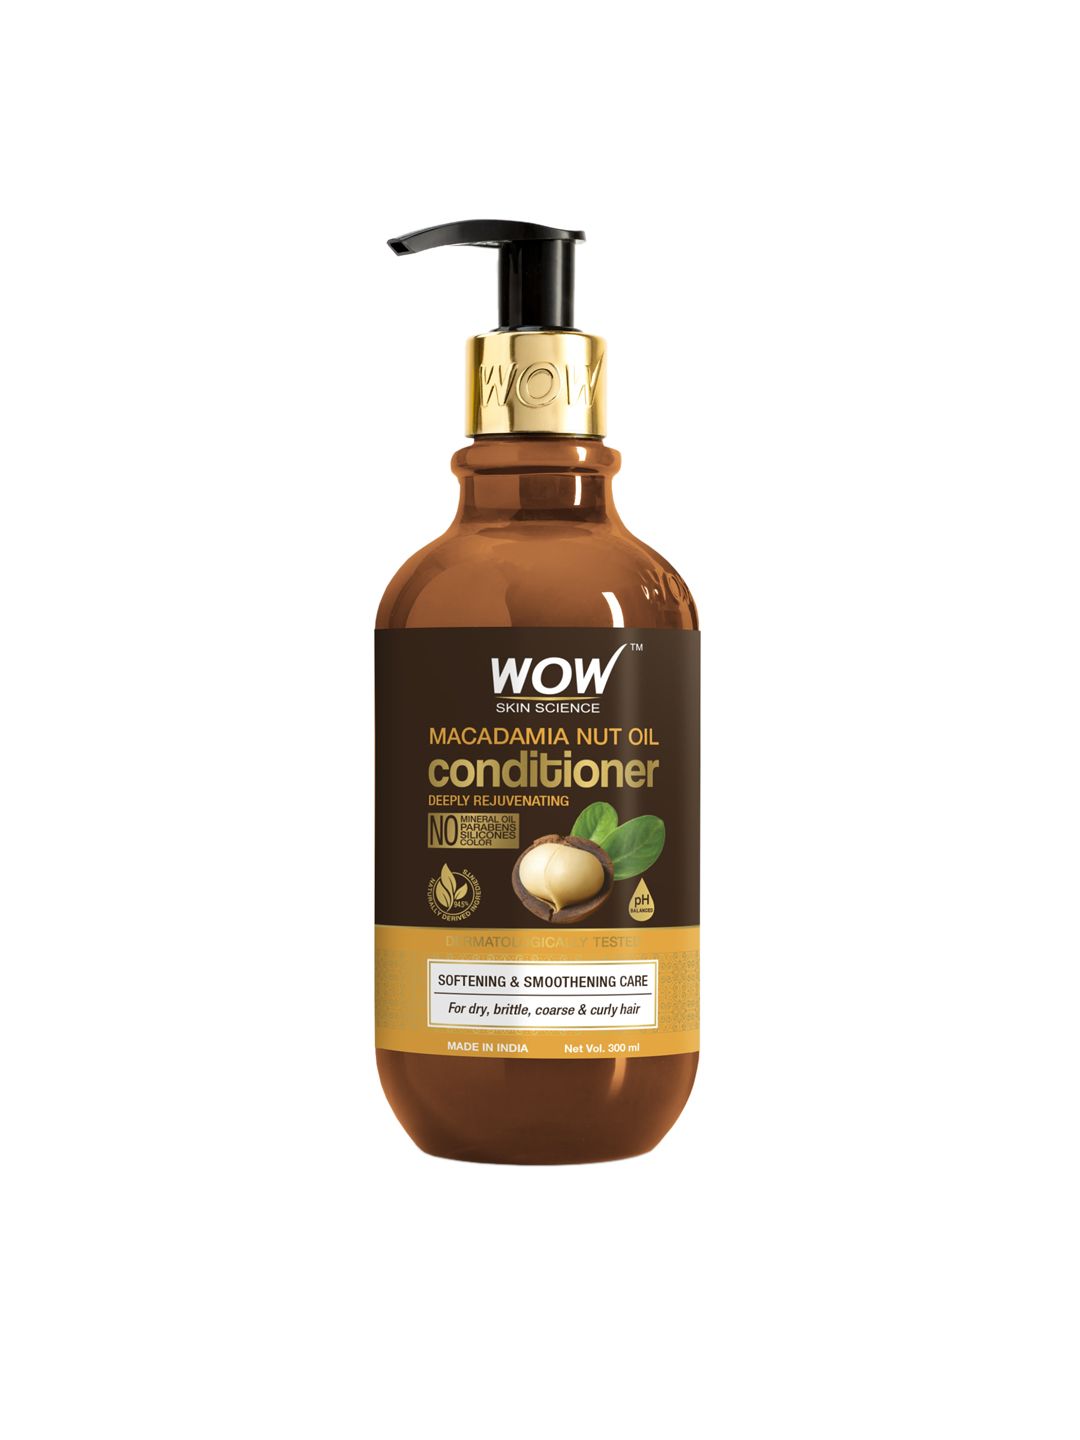 WOW SKIN SCIENCE Deeply Rejuvenating Macadamia Nut Oil Conditioner - 300 ml Price in India